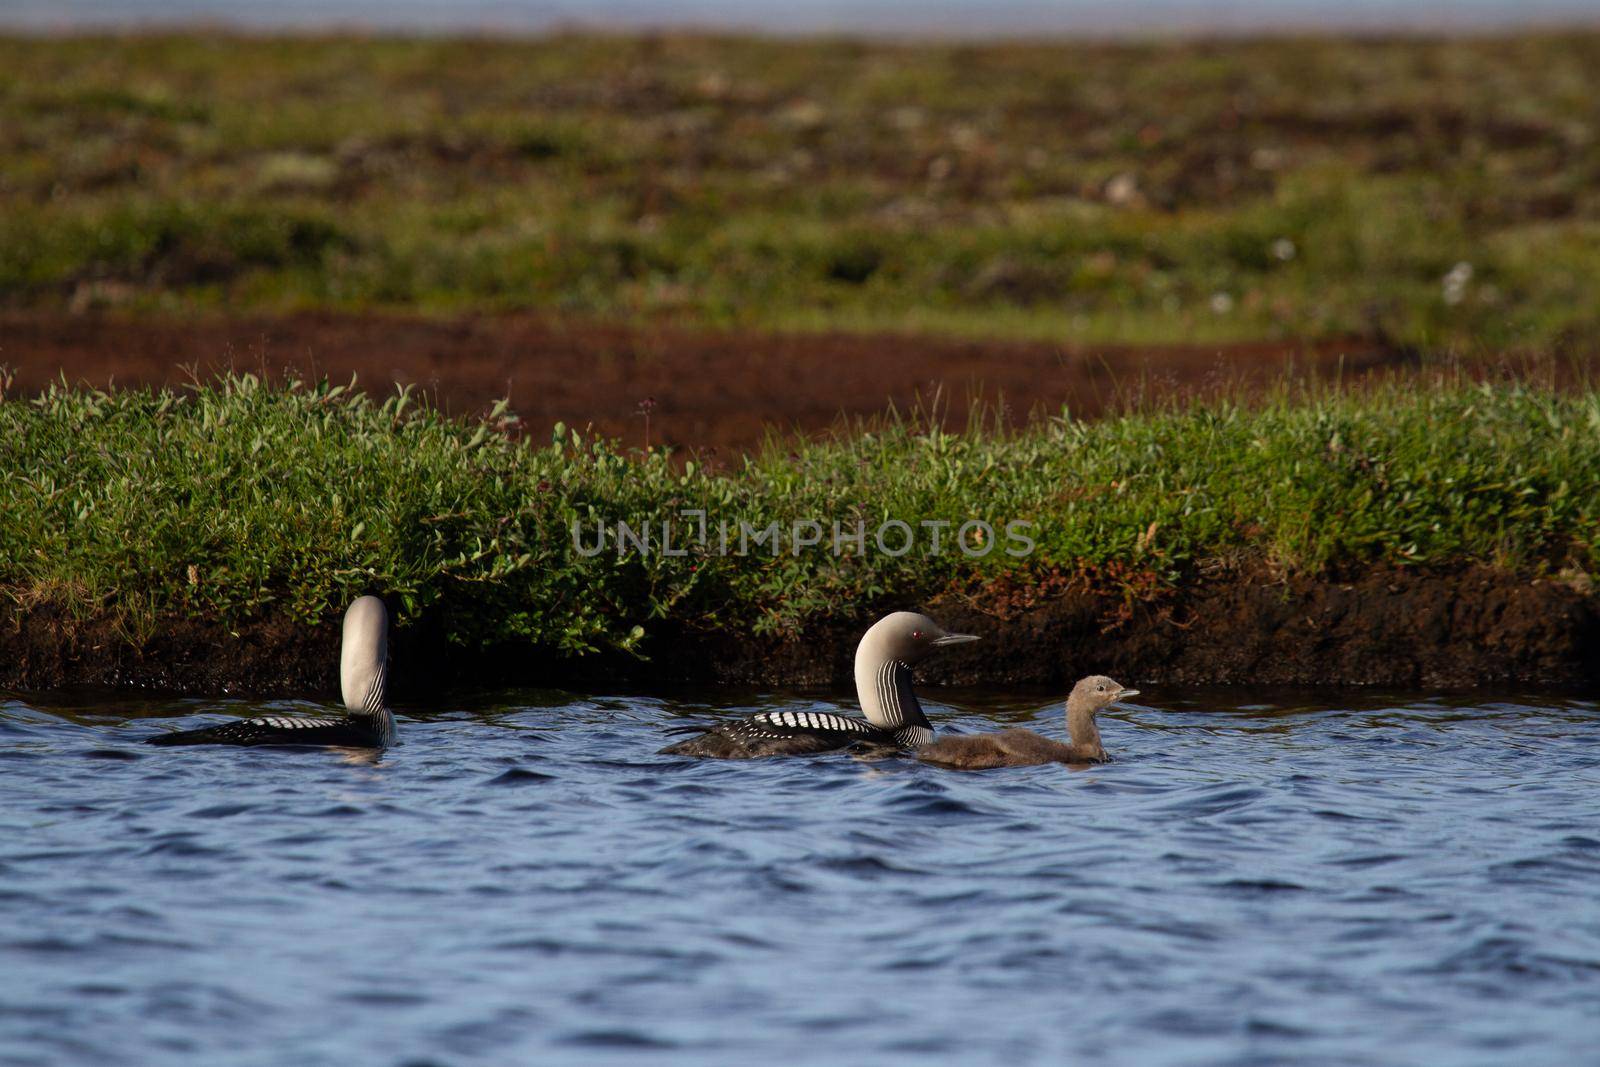 Two adult Pacific Loon or Pacific Diver and juvenile swimming around in an arctic lake with willows in the background by Granchinho